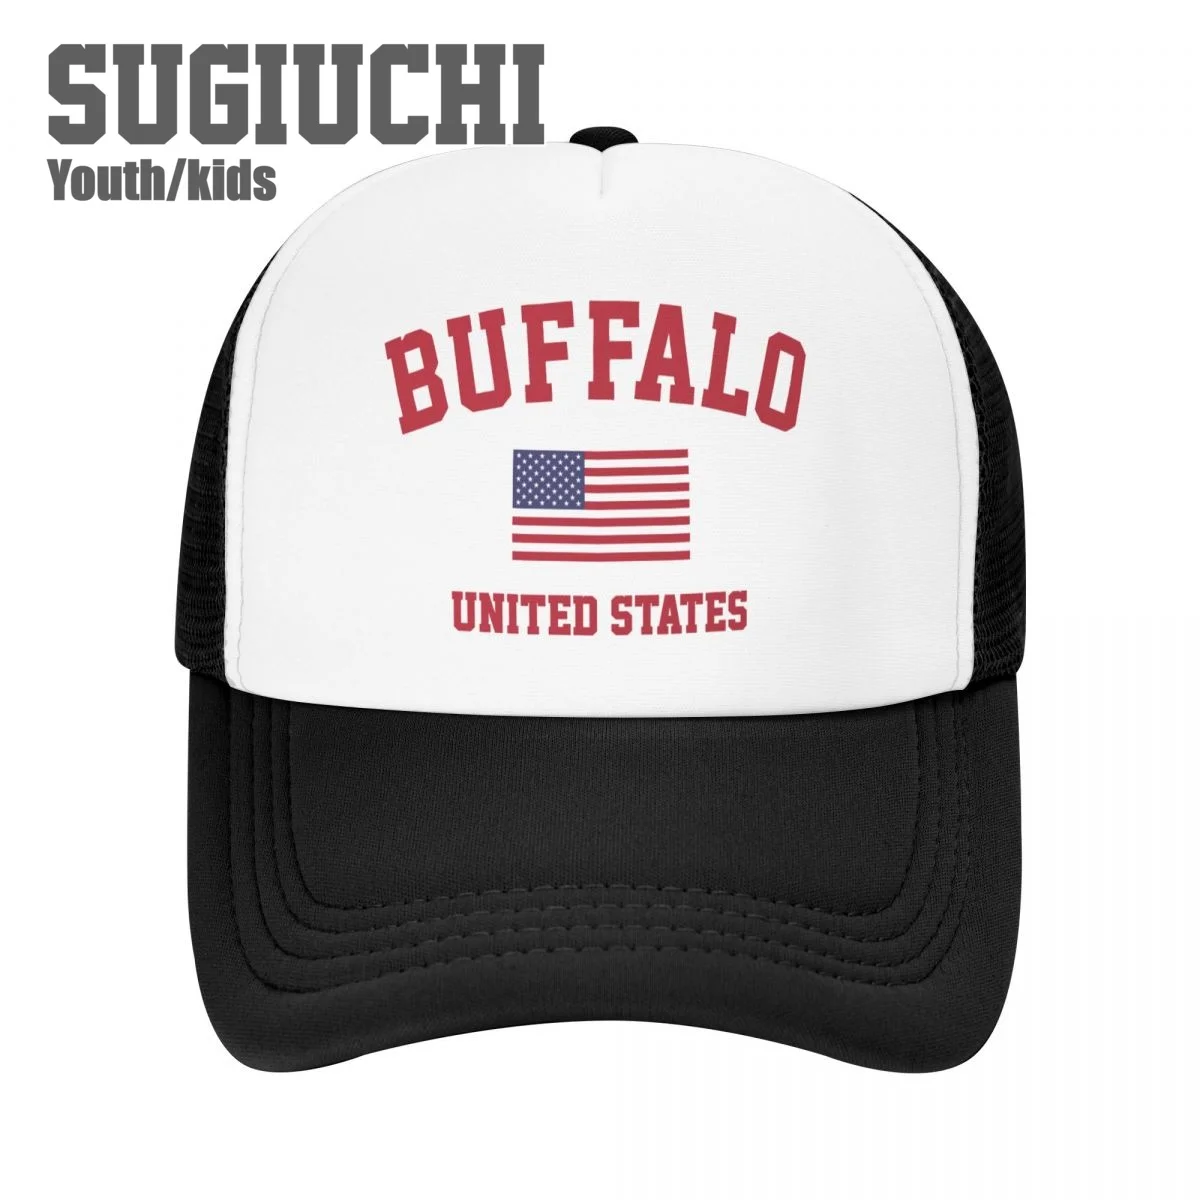 

Kids Mesh Cap Hat Buffalo Of USA United States City Baseball Caps for Youth Boys Girls Pupil Children's Hats Outdoor Unisex